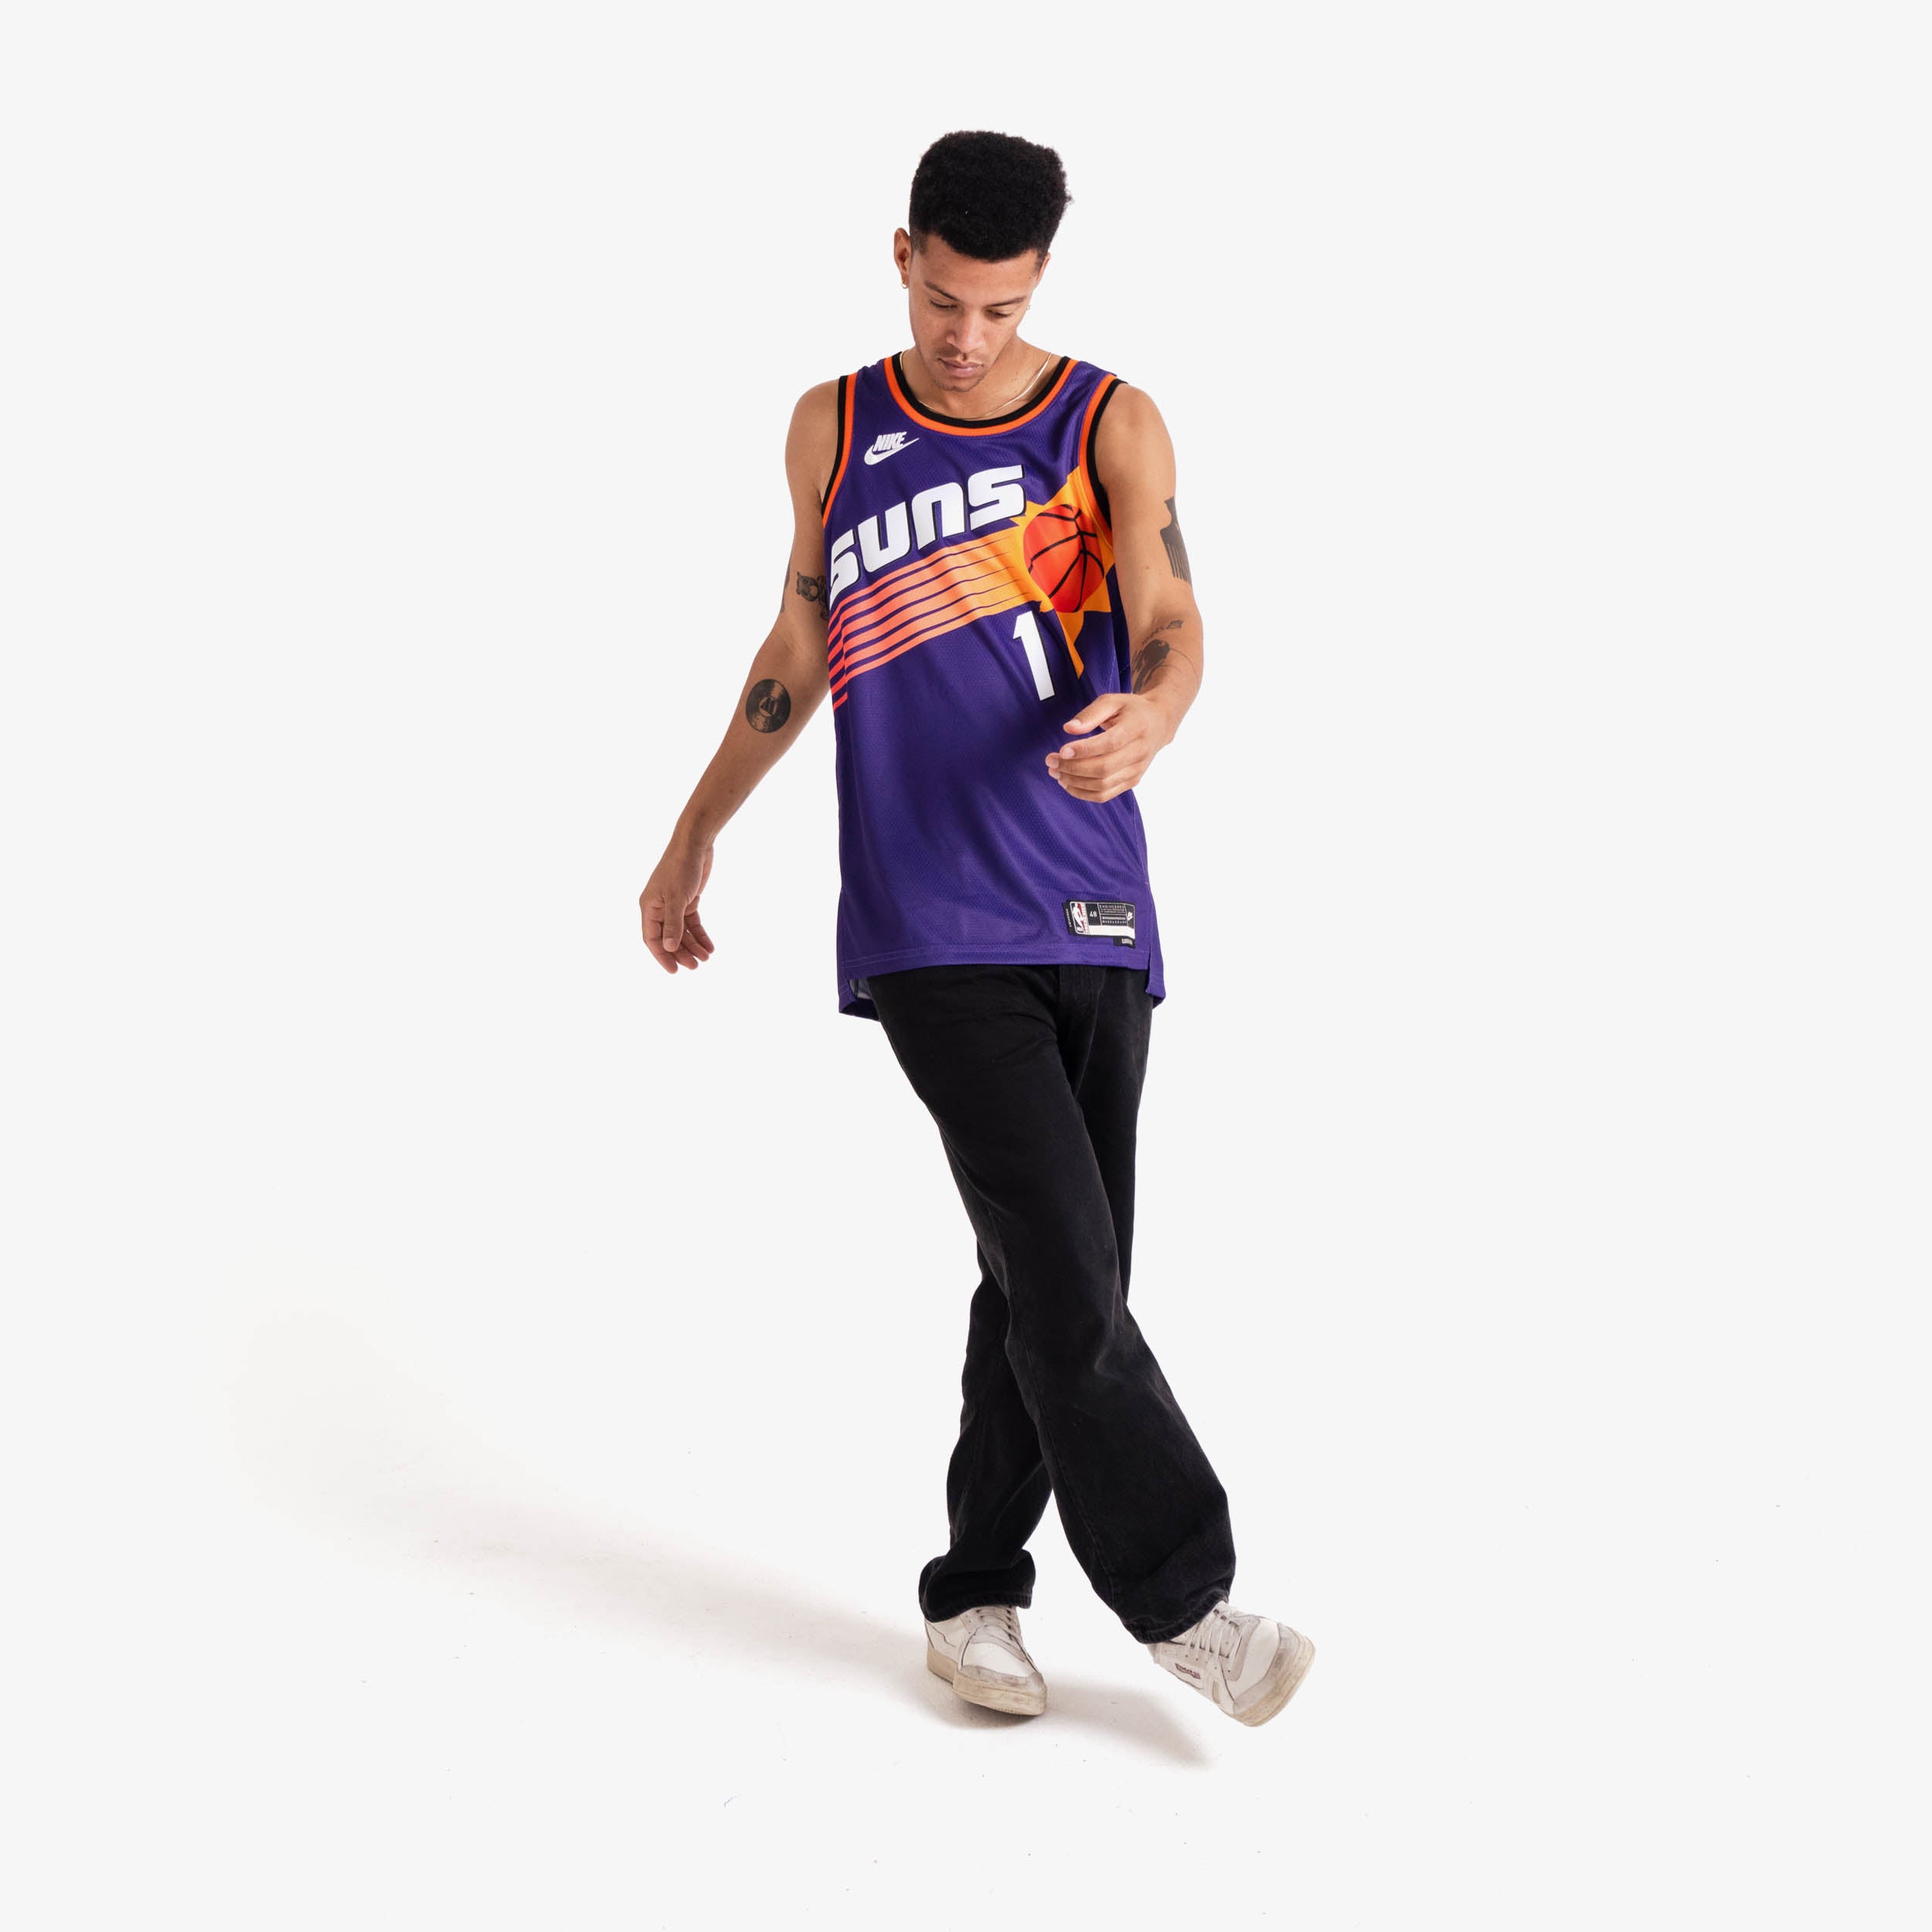 Devin Booker The Valley City Edition – Jersey Crate